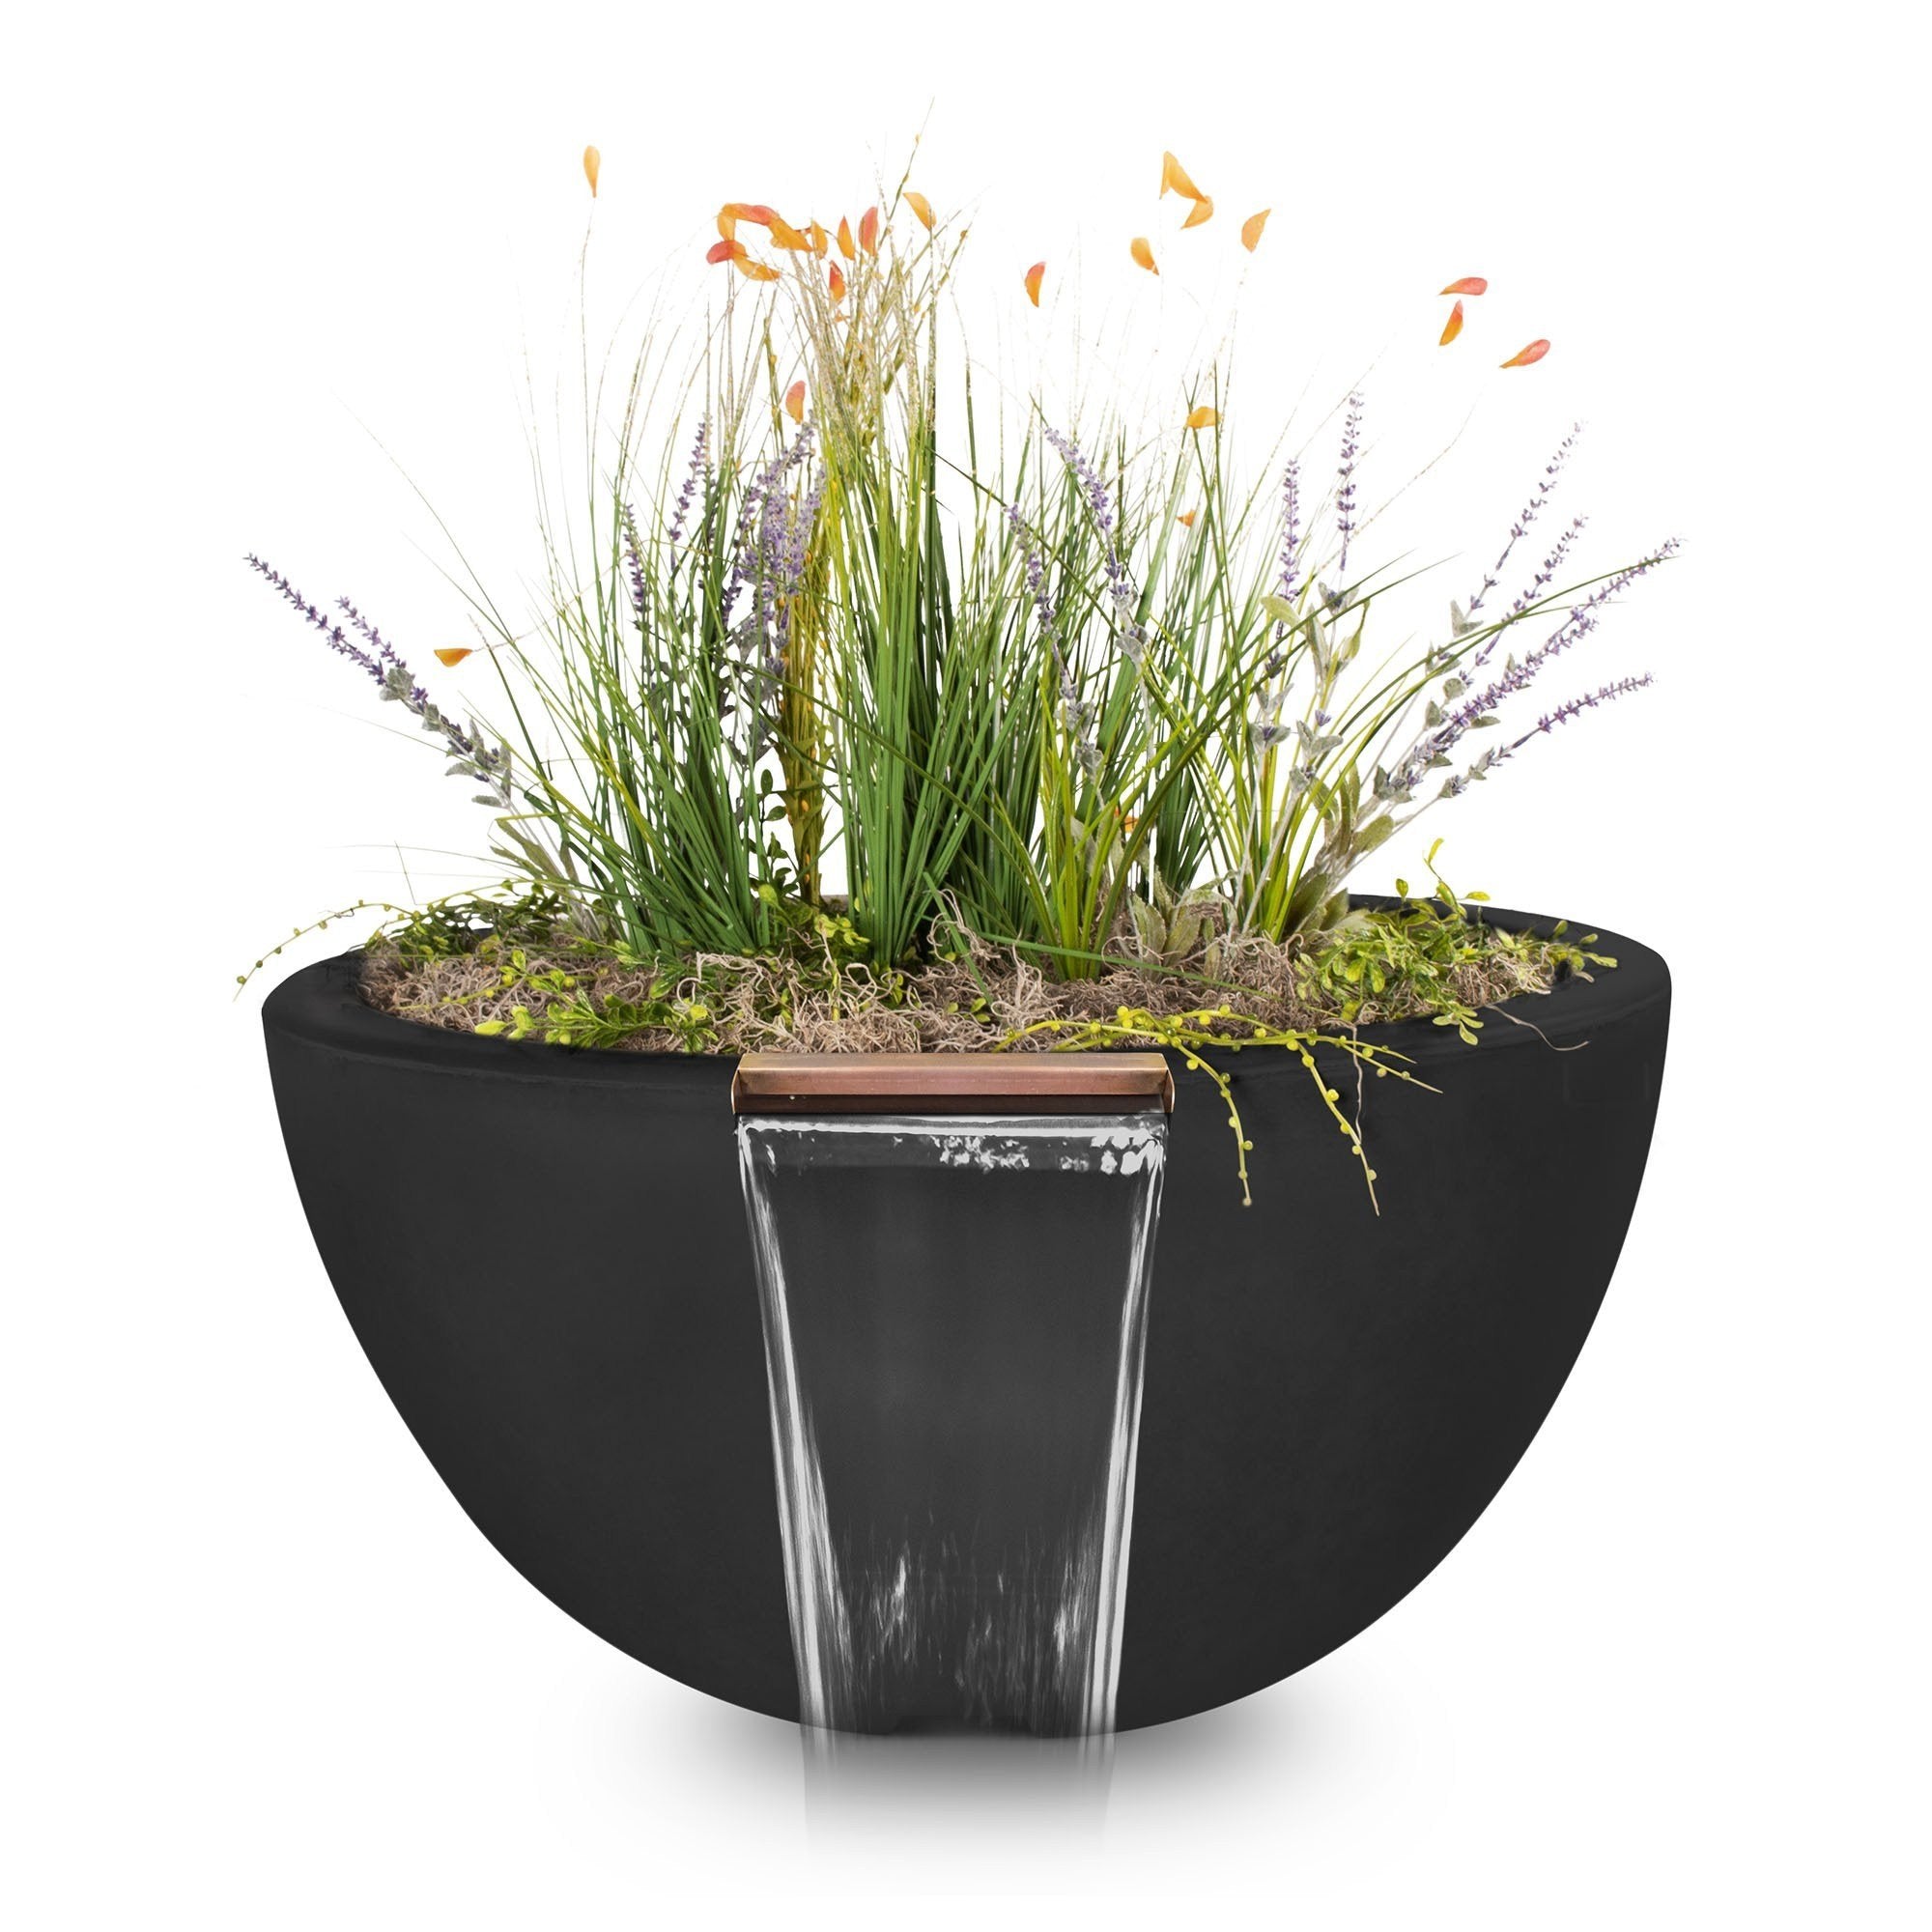 TOP Fires Luna Planter & Water Bowl in GFRC Concrete by The Outdoor Plus - Majestic Fountains